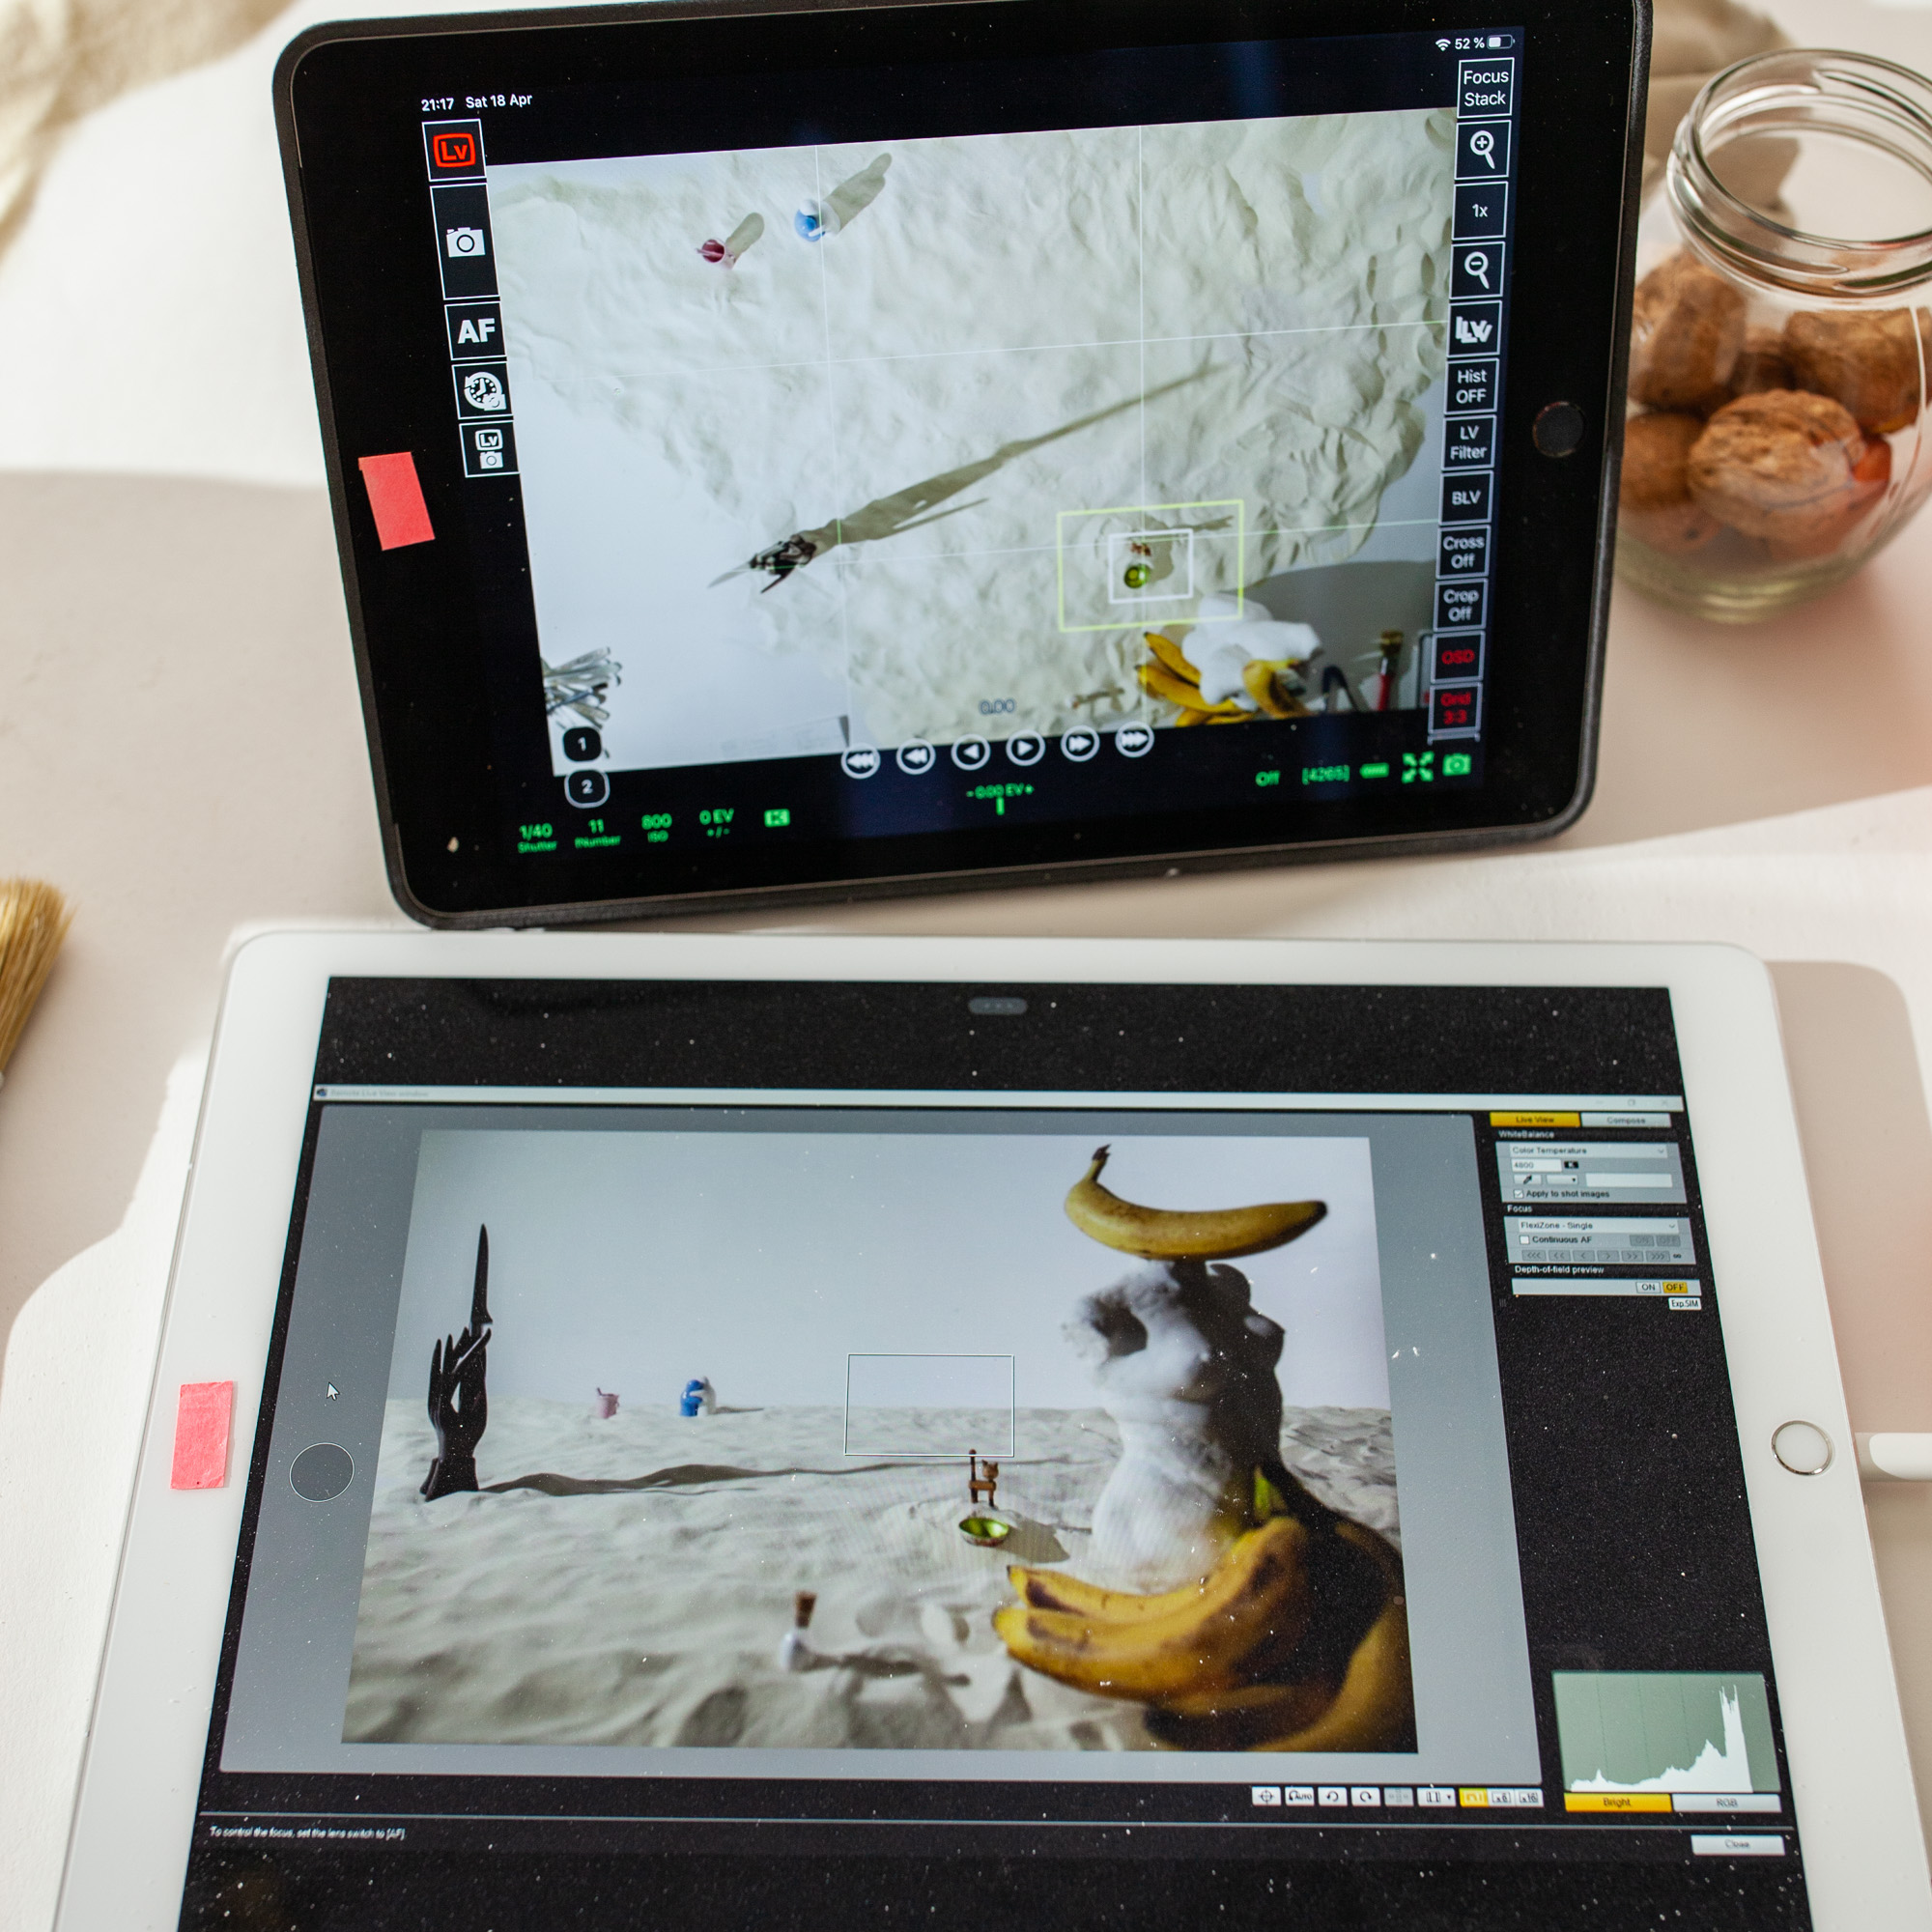 Behind the scenes of foodlydoodlydoo's vegan banana bread recipe. The photo shows two tablets connected to the cameras.